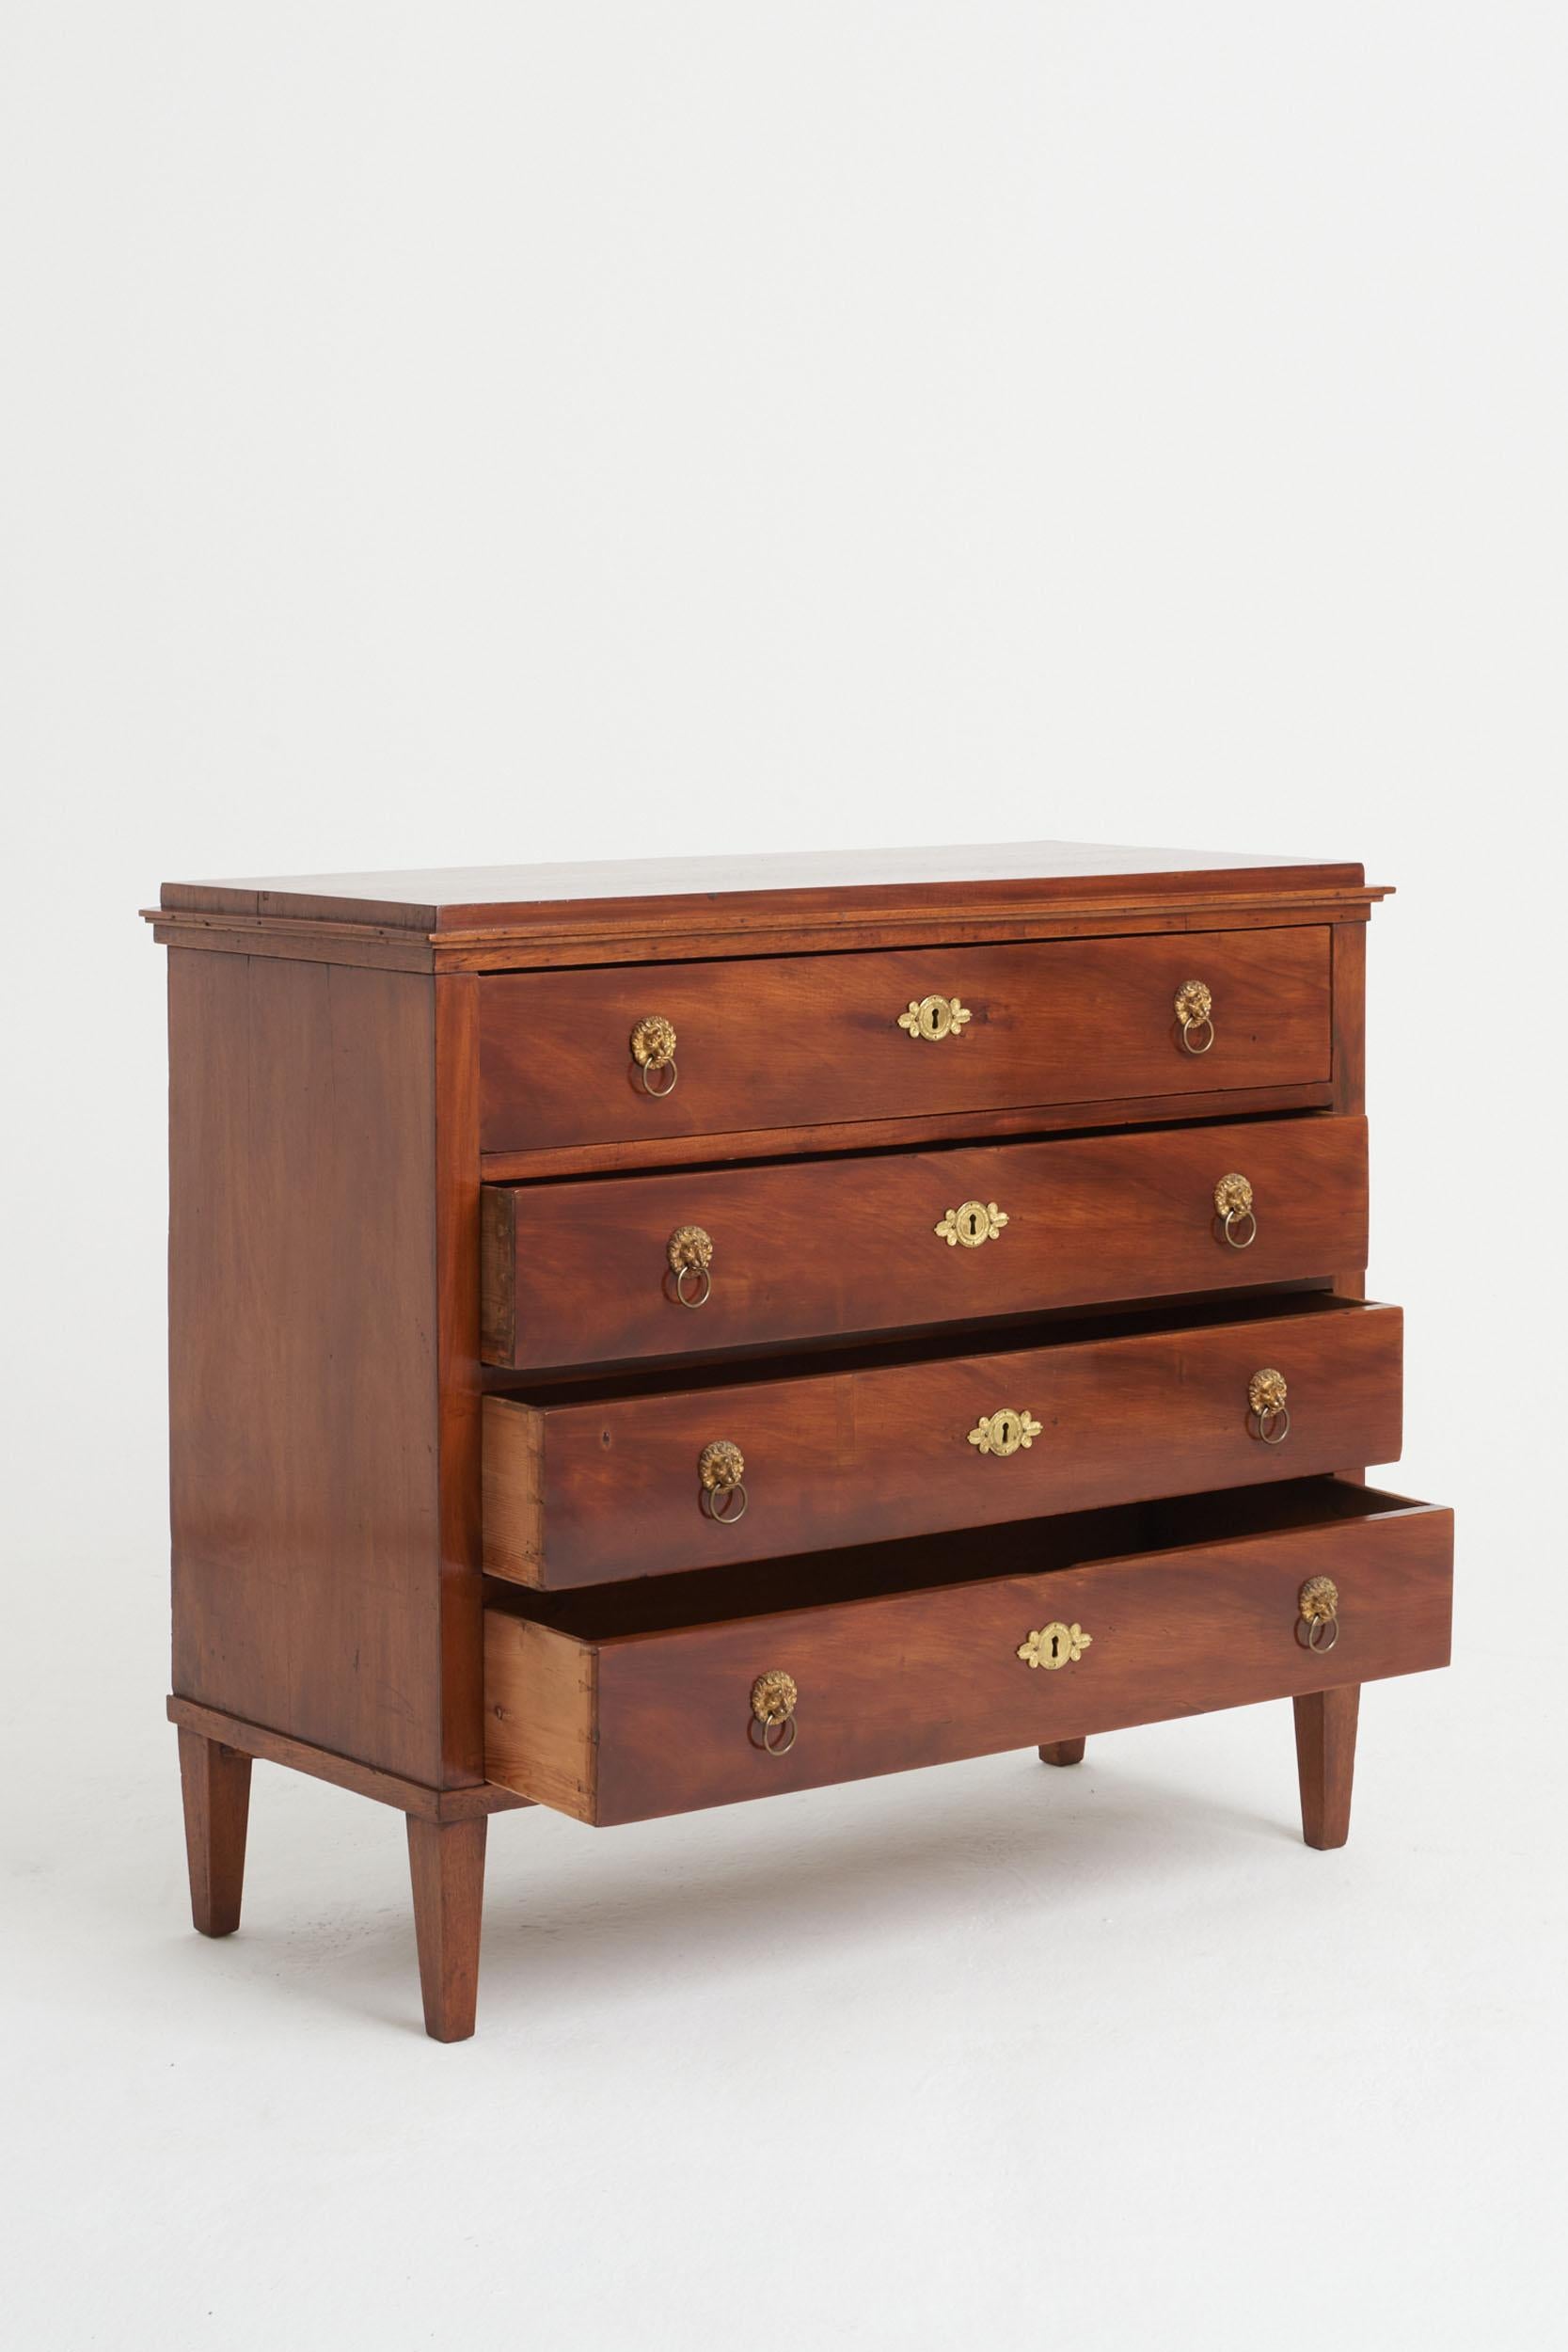 19th Century Empire Mahogany Chest of Drawers For Sale